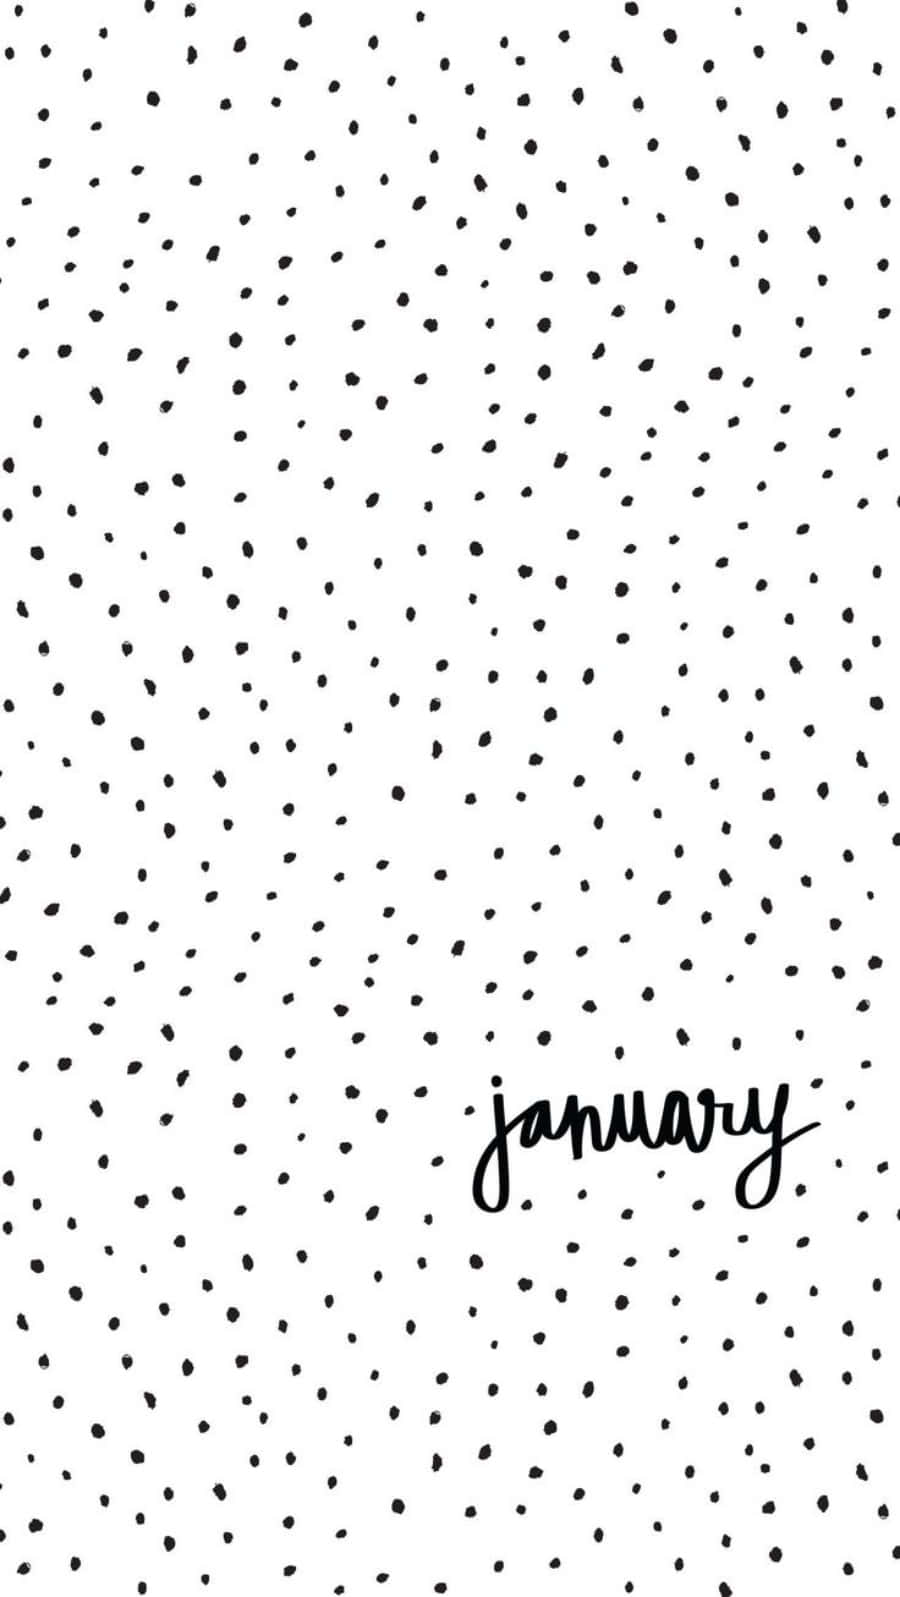 Take advantage of the January sales with January Phone Wallpaper